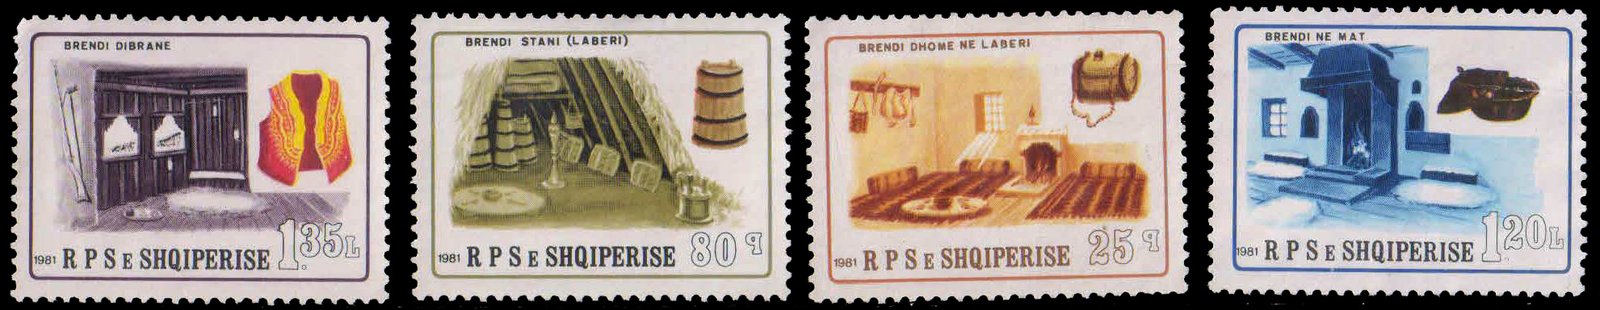 ALBANIA 1980-Interiors, Fireplace, Pottery, Weapons, Chair, Chimney, Set of 4, Mint G/W, S.G. 2036-39-Cat £ 5-